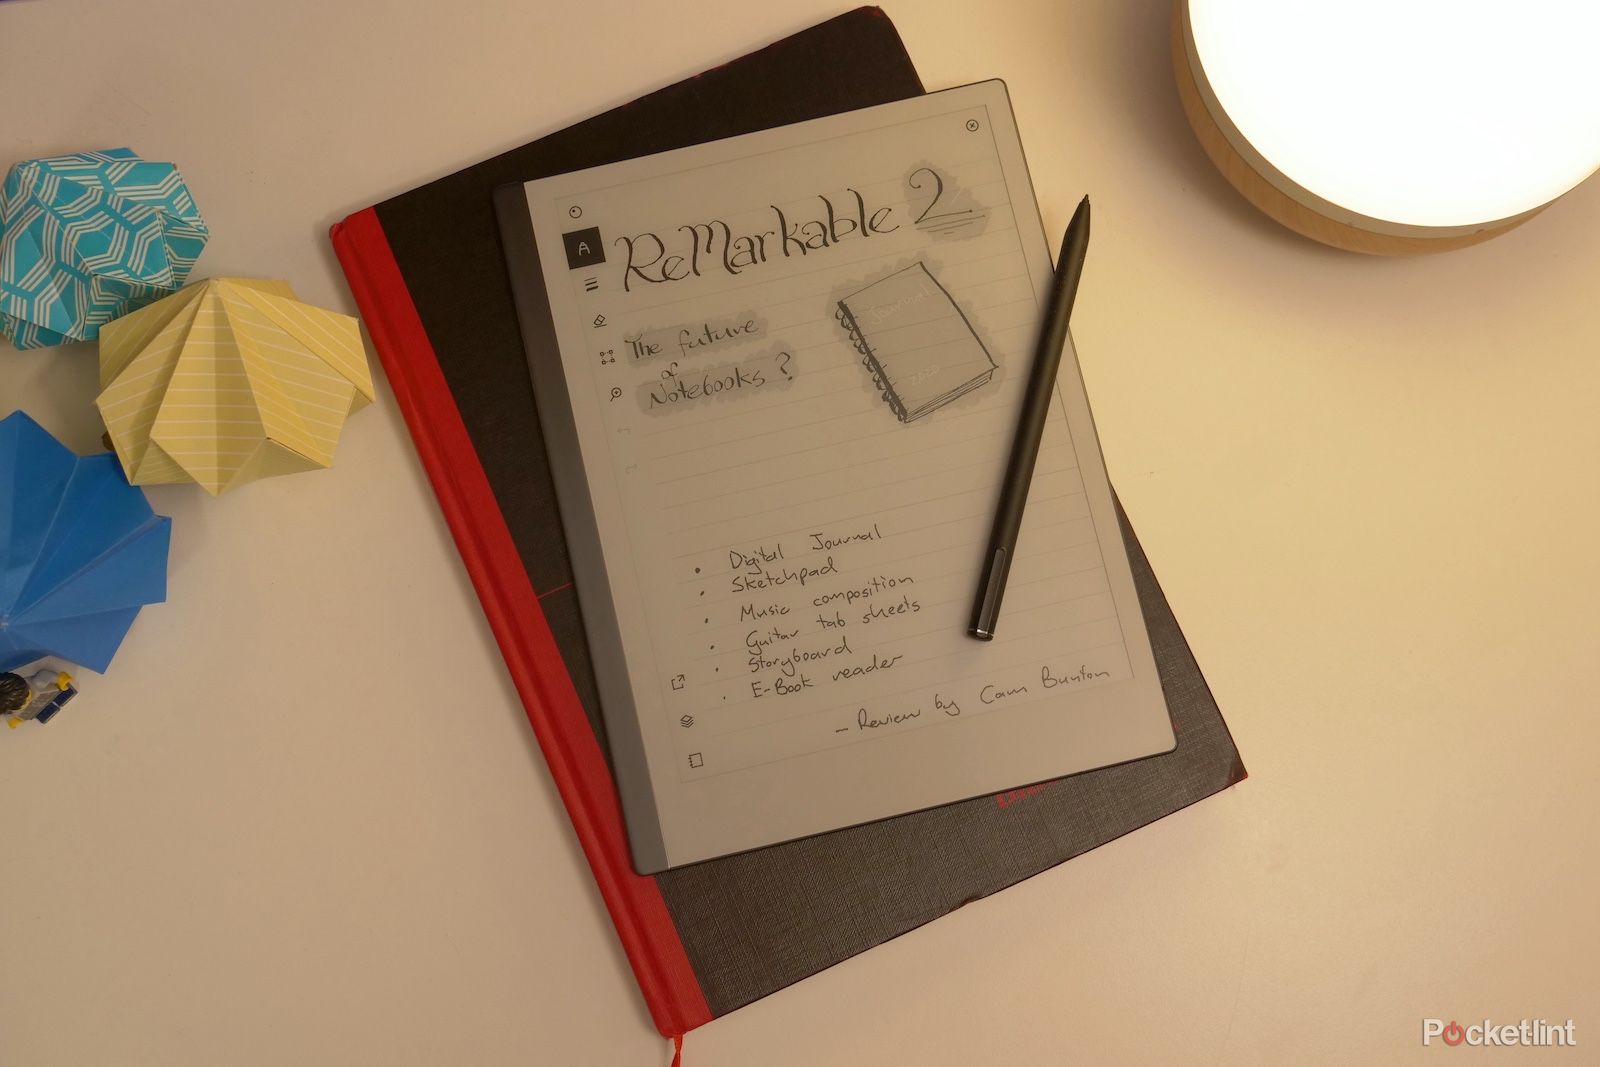 Best note-taking tablets: Compare the reMarkable 2, Kindle Scribe, and more